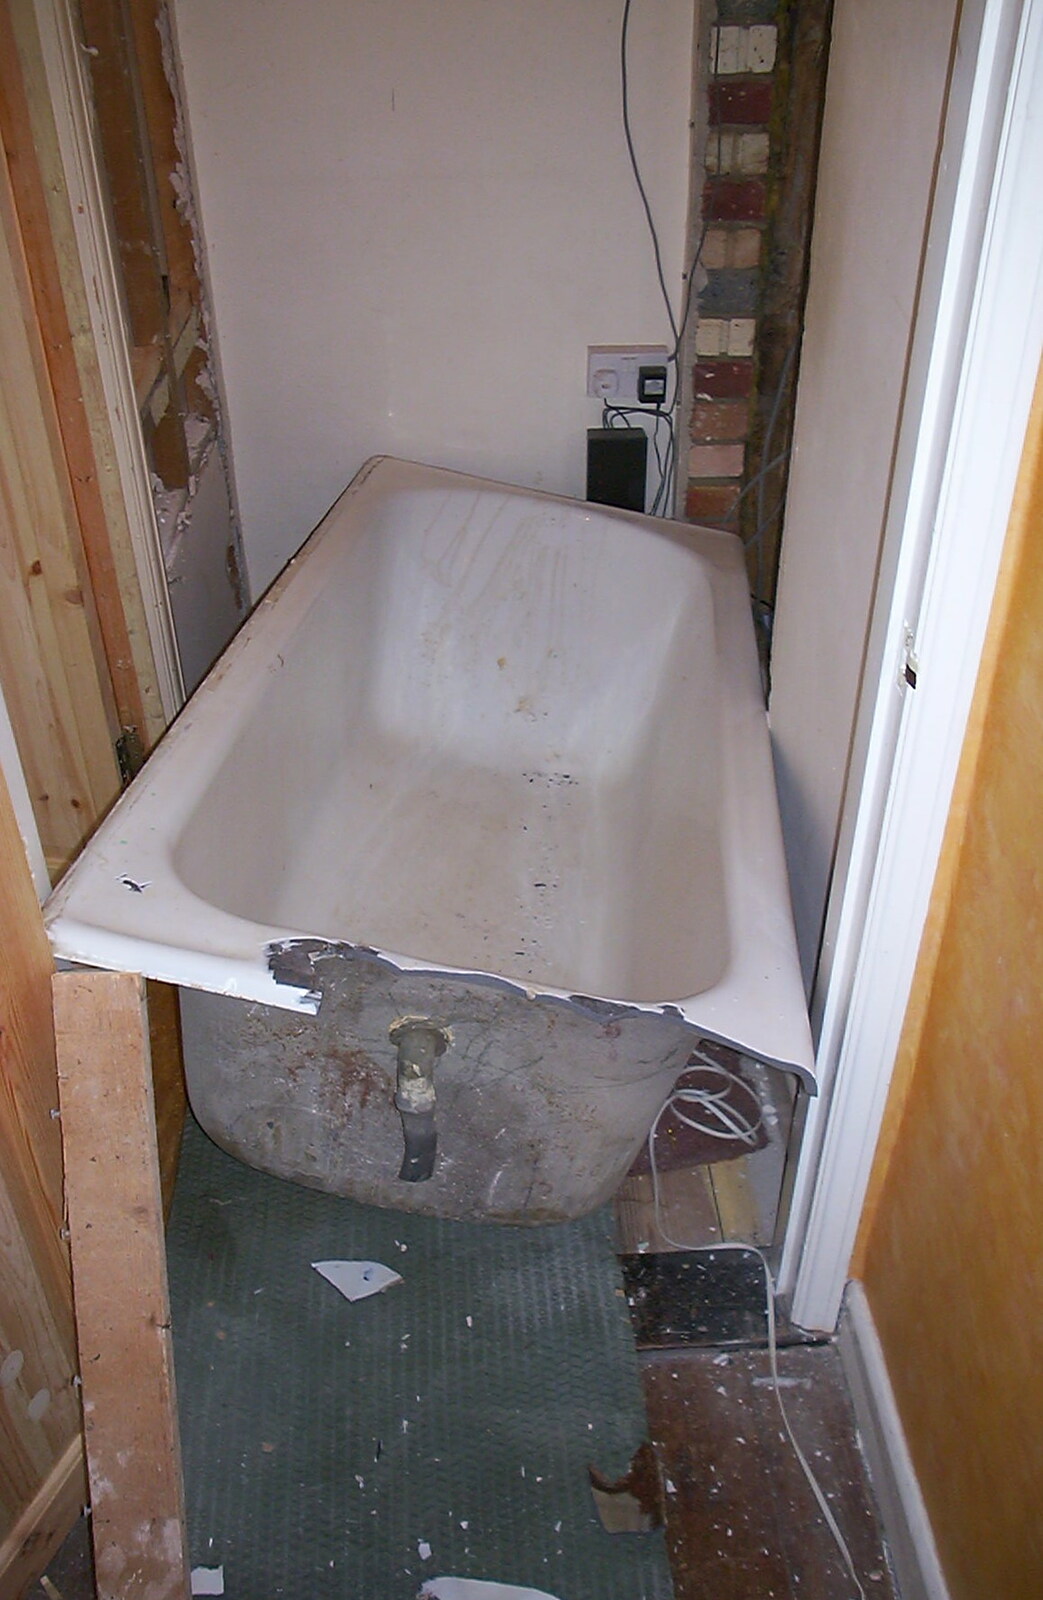 The old bath gets stuck on the landing from A Hard-Drive Clock and Other Projects, Brome, Suffolk - 28th June 2002